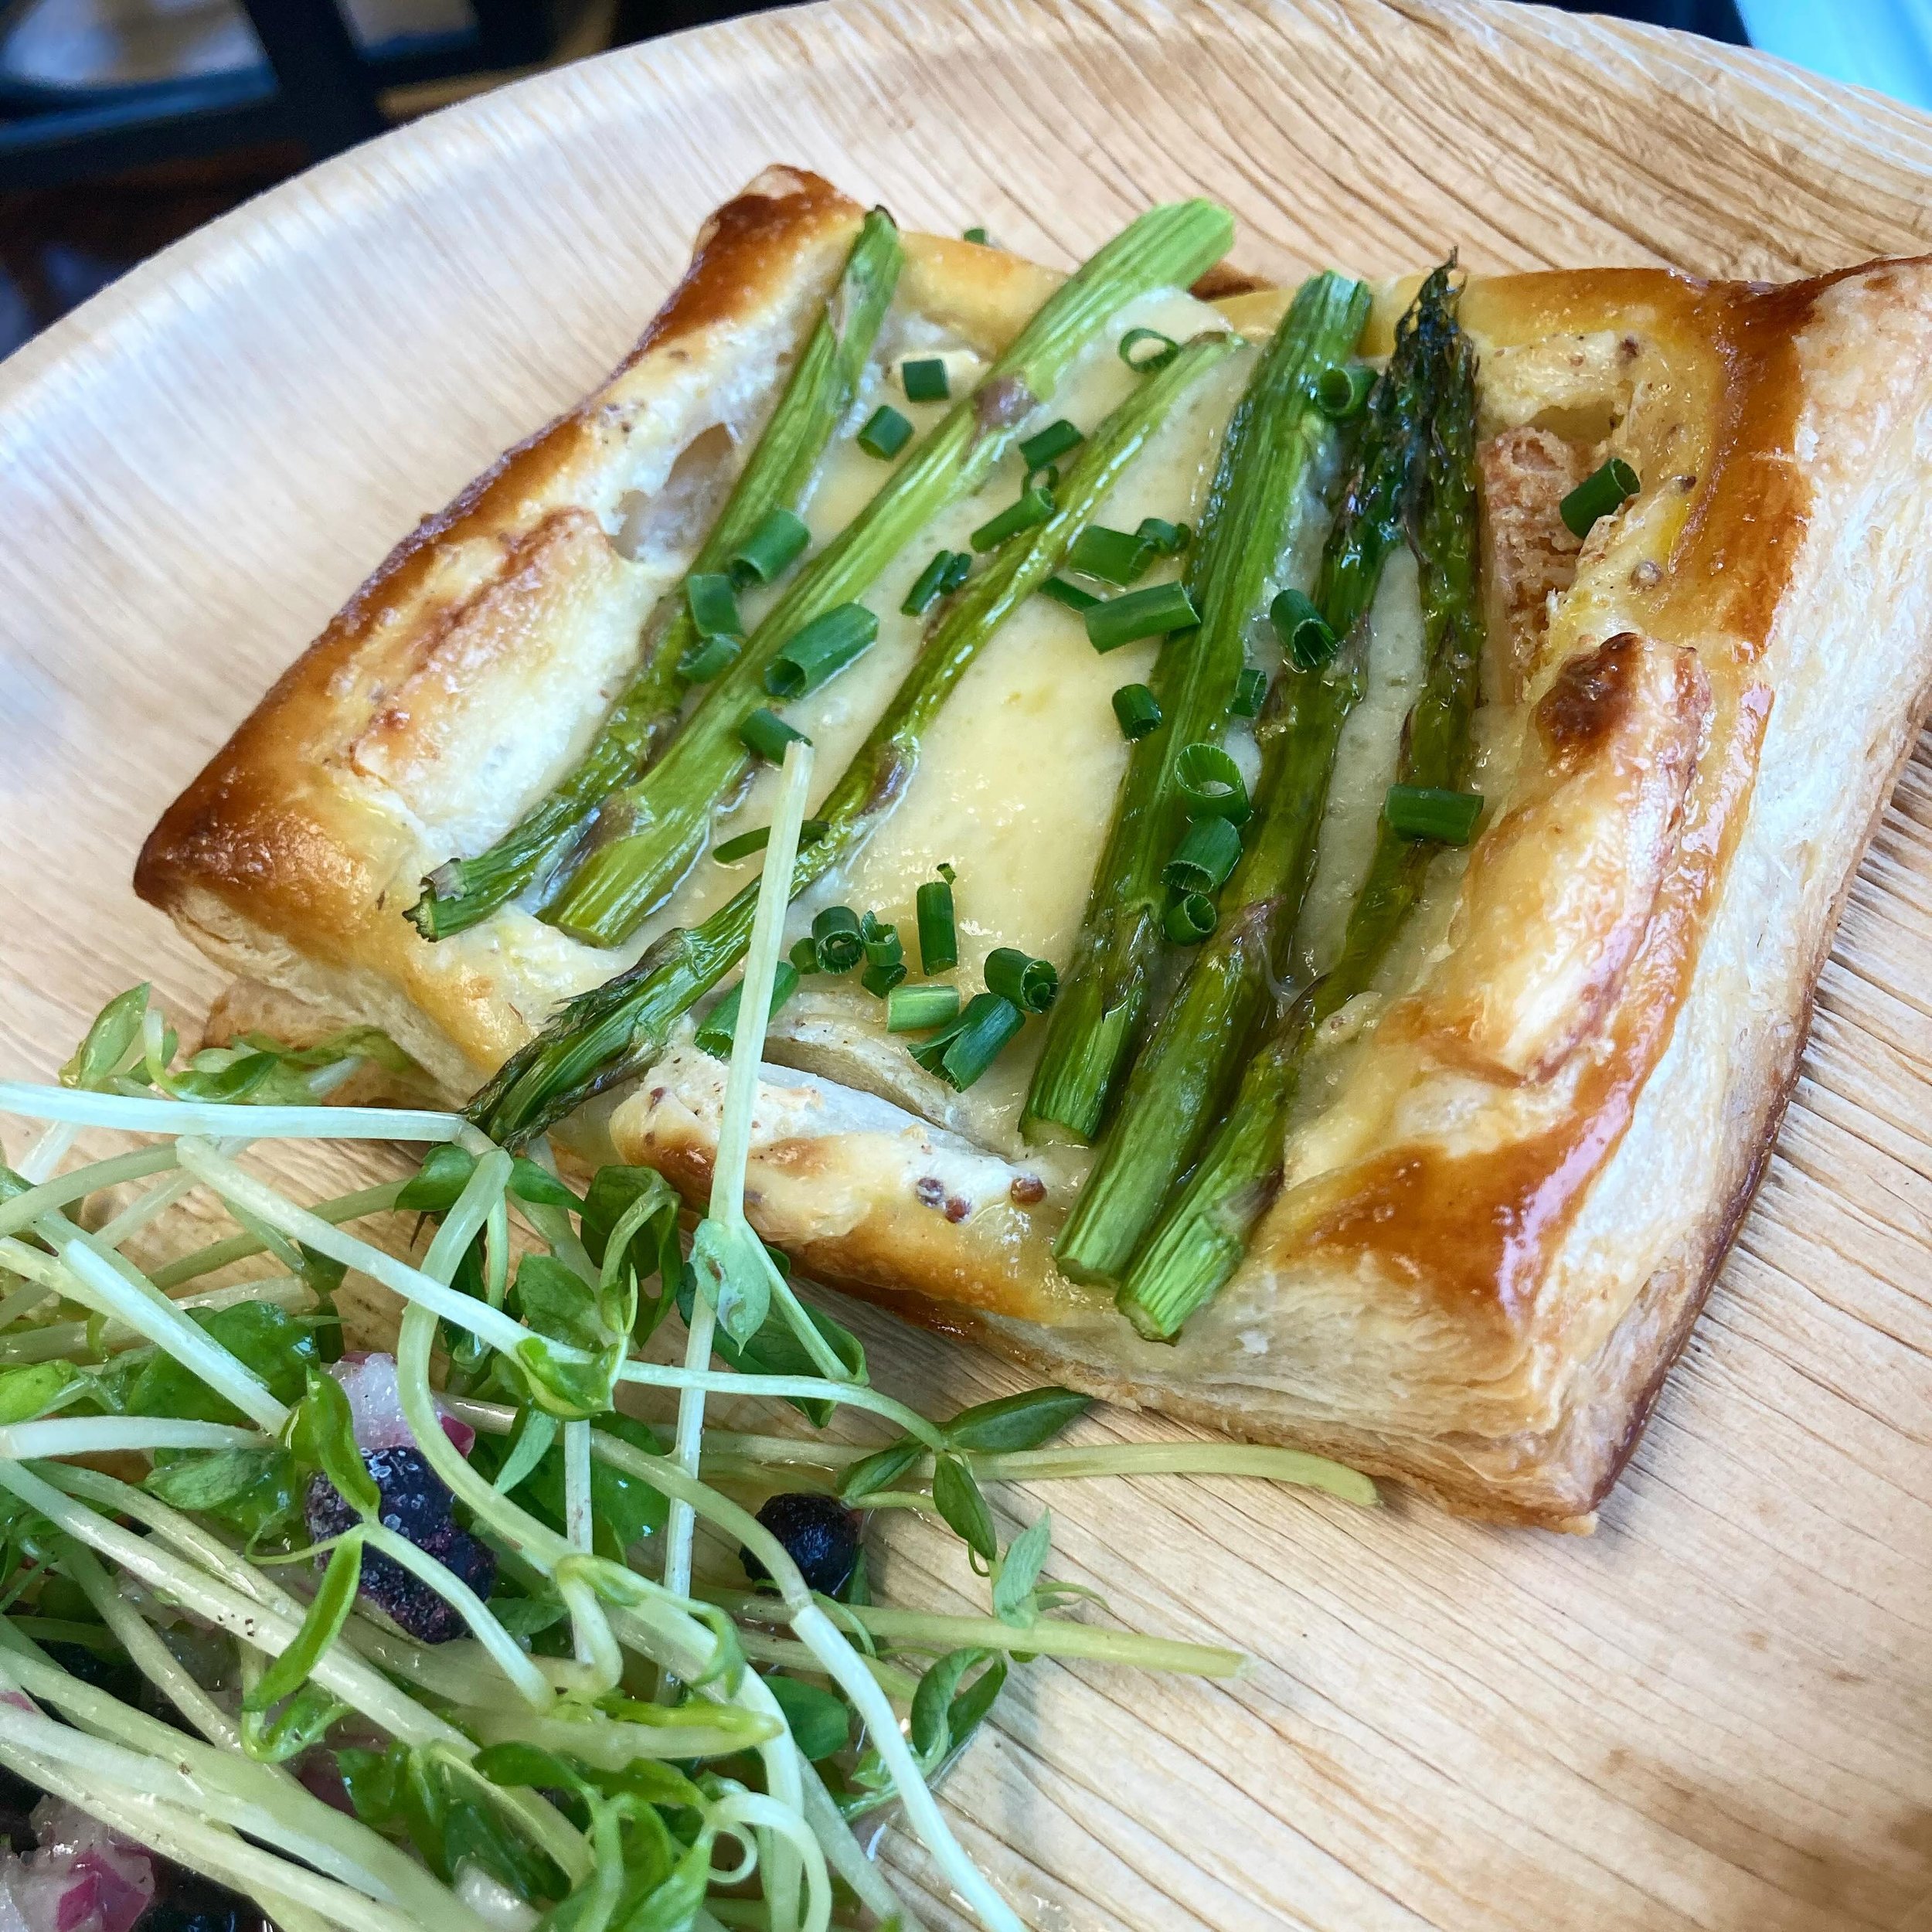 🍃Special this week! 🍃
Asparagus tart with gruyere and dijon- creme fraiche served with micro greens and blackberries~
A perfect mother&rsquo;s day treat ❤️

#maineeats #207 #mainebreakfast